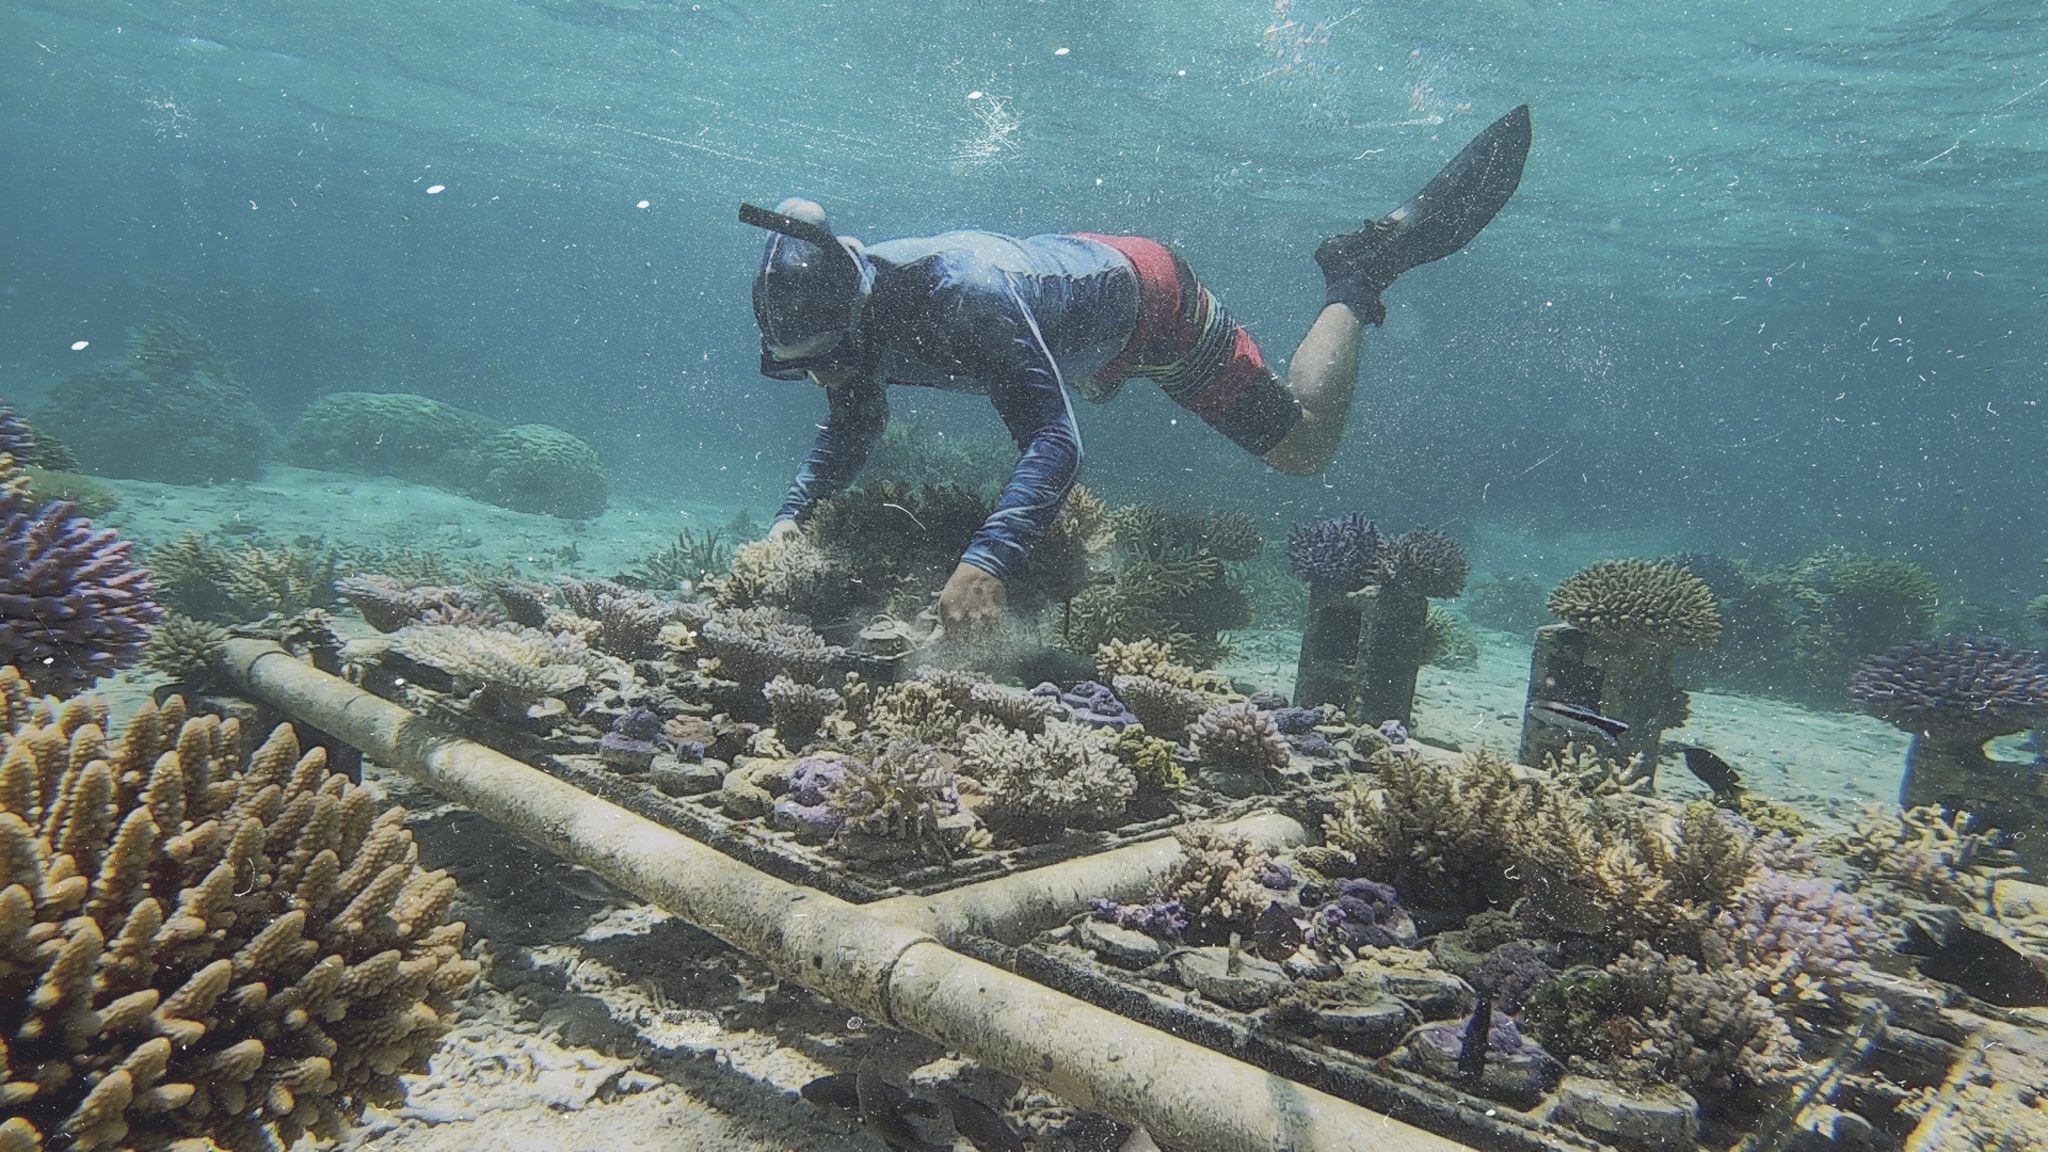 Victor-scuba-diving-to-tend-to-coral-nursery